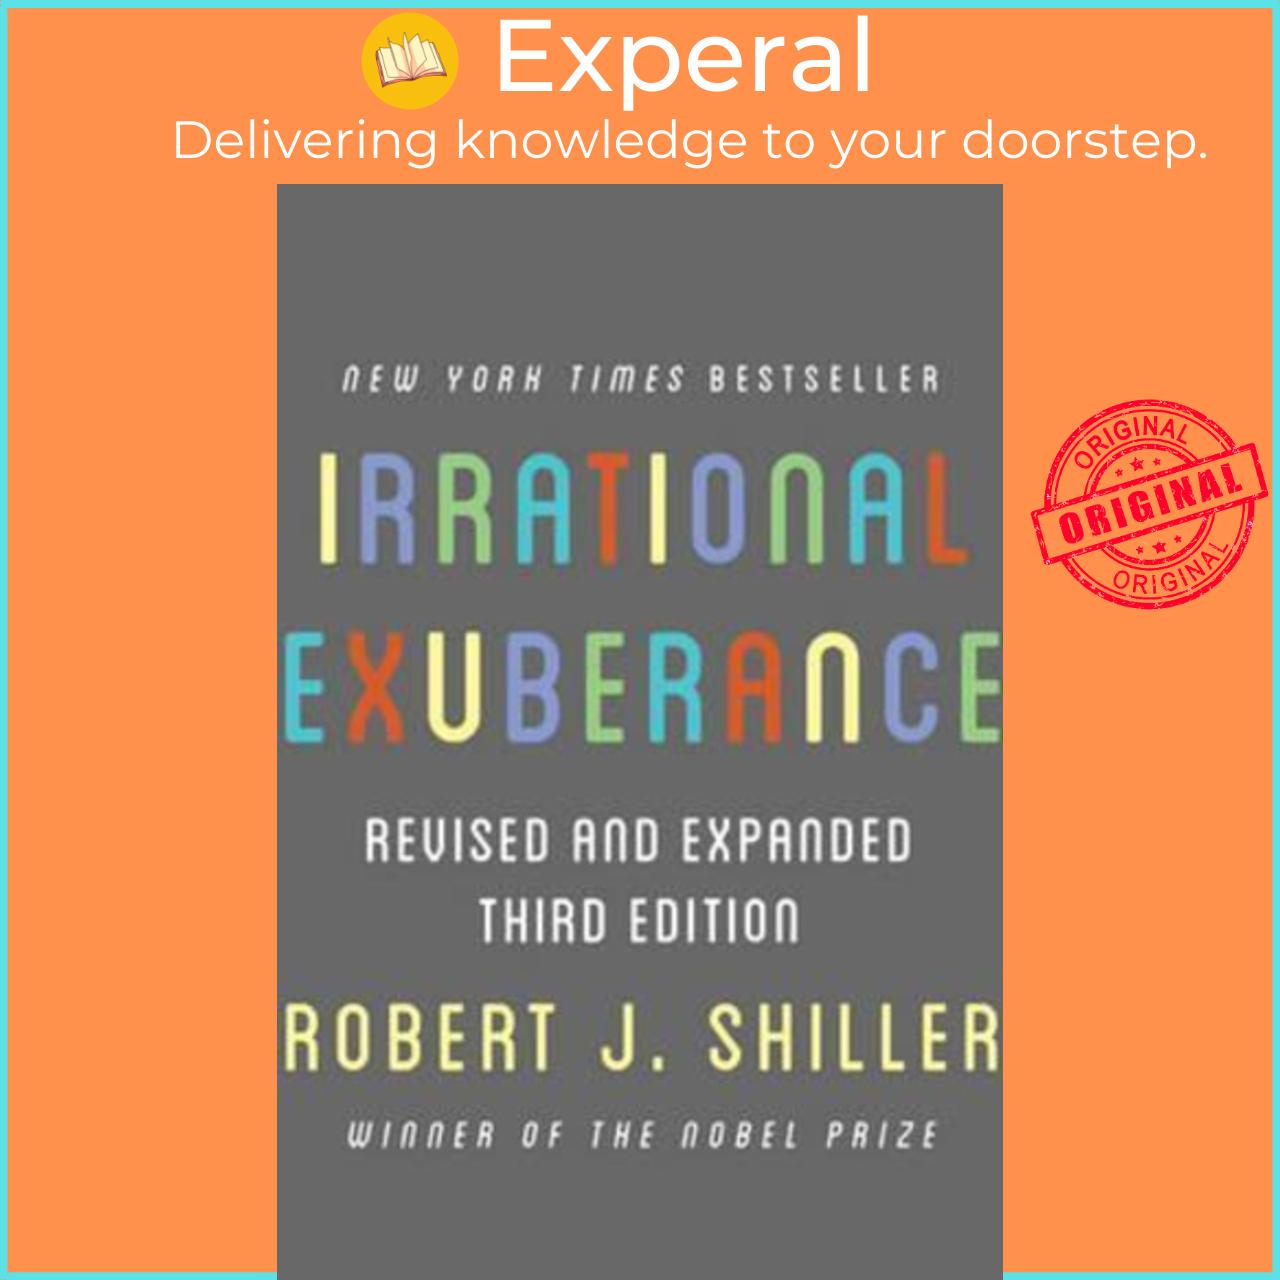 Sách - Irrational Exuberance : Revised and Expanded Third Edition by Robert J. Shiller (US edition, paperback)